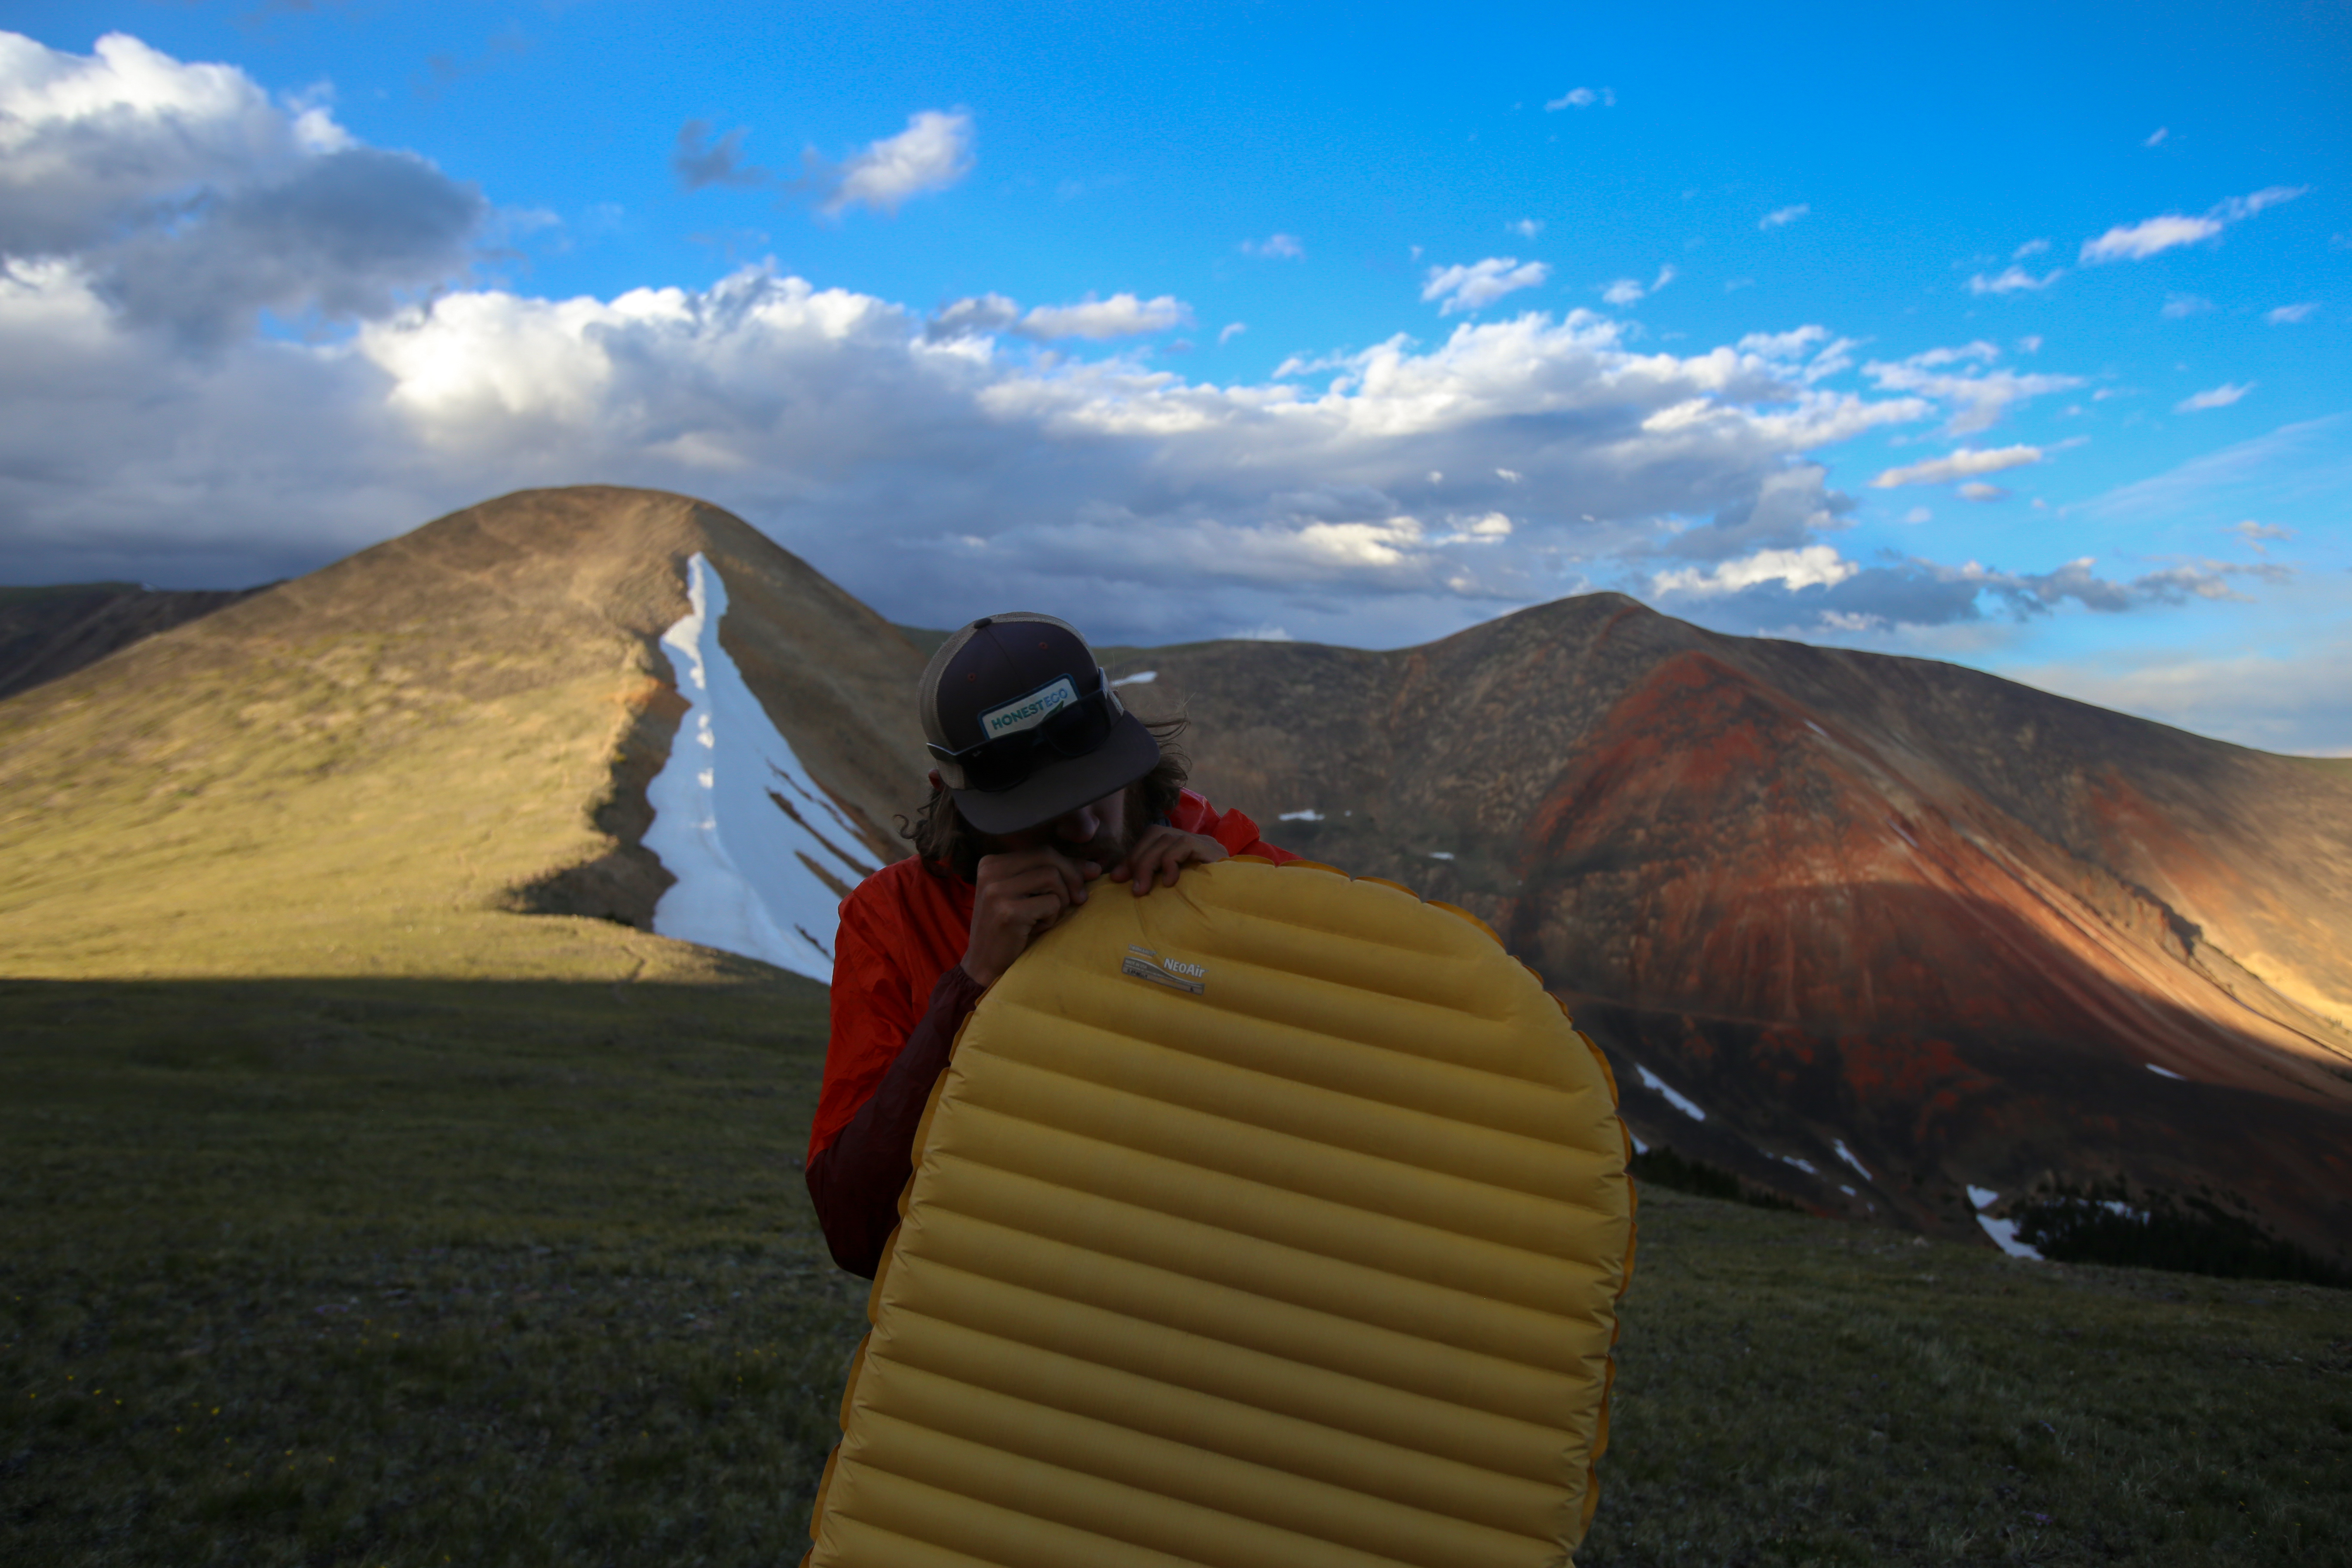 NeoAir XLite Sleeping Pad on the Continental Divide to set up camp home